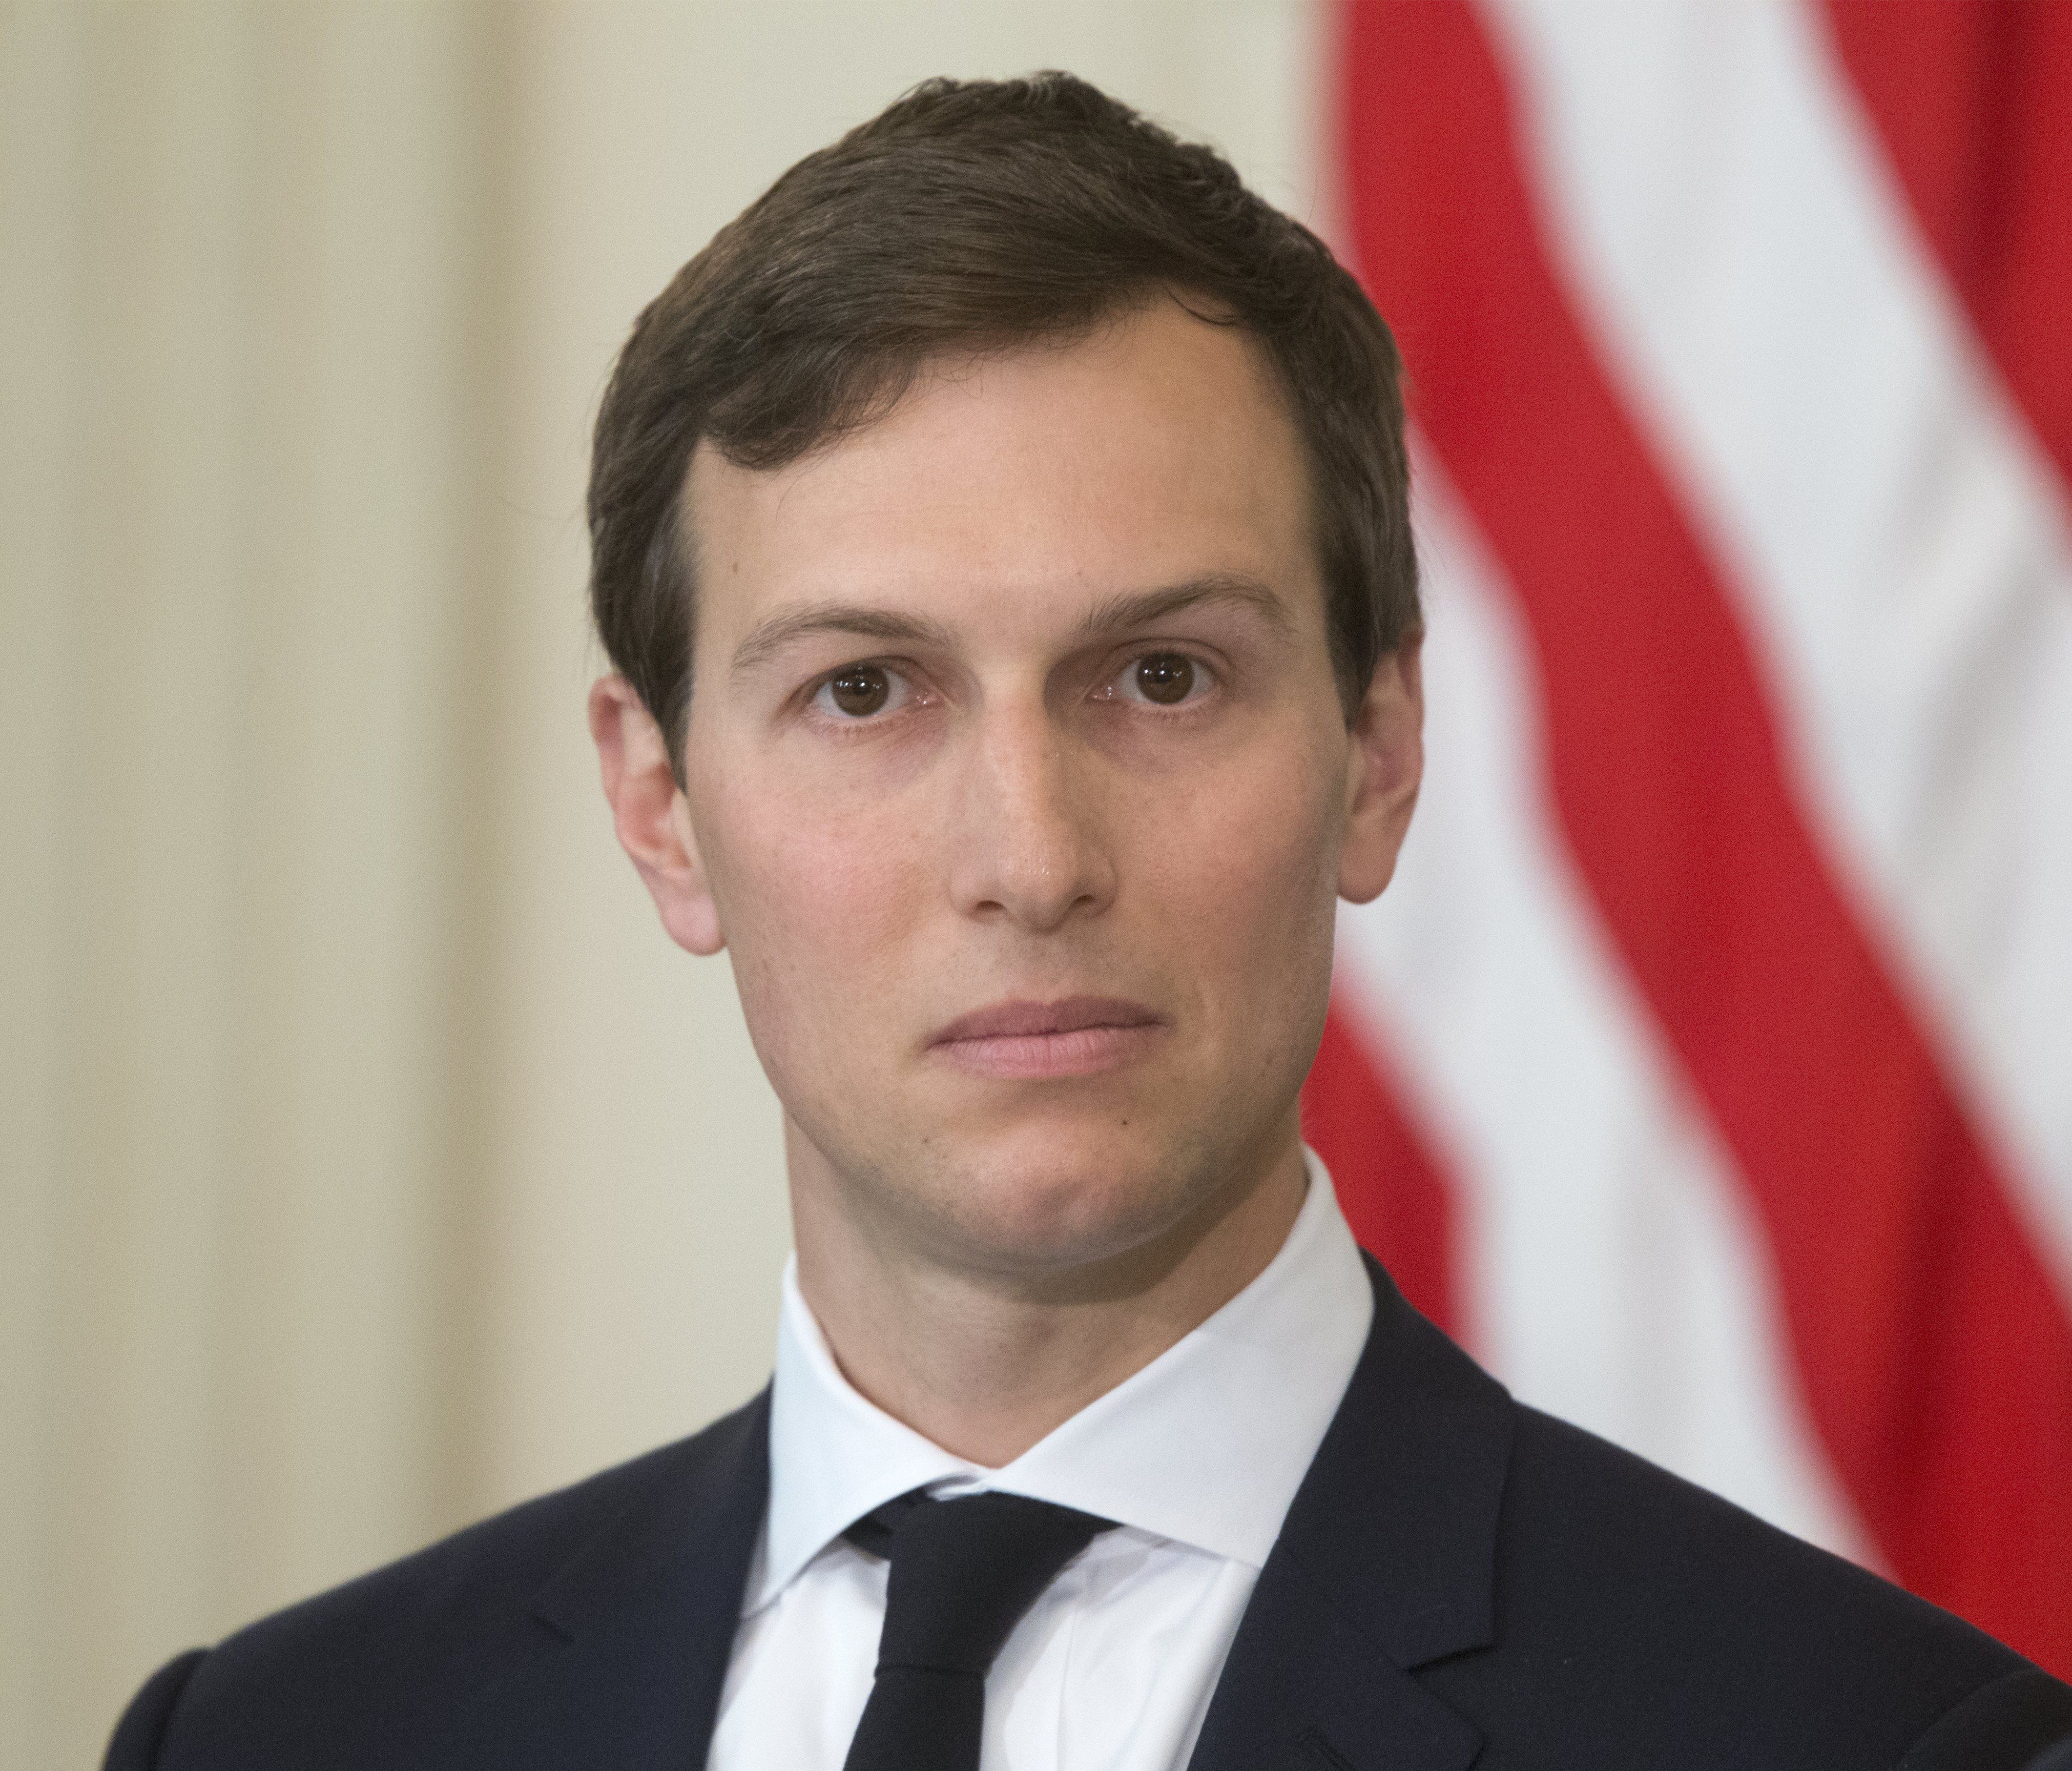 Senior adviser to President Trump Jared Kushner attends a meeting with CEOs of manufacturing companies hosted by Trump in the State Dining Room of the White House in Washington, Feb. 23, 2017.